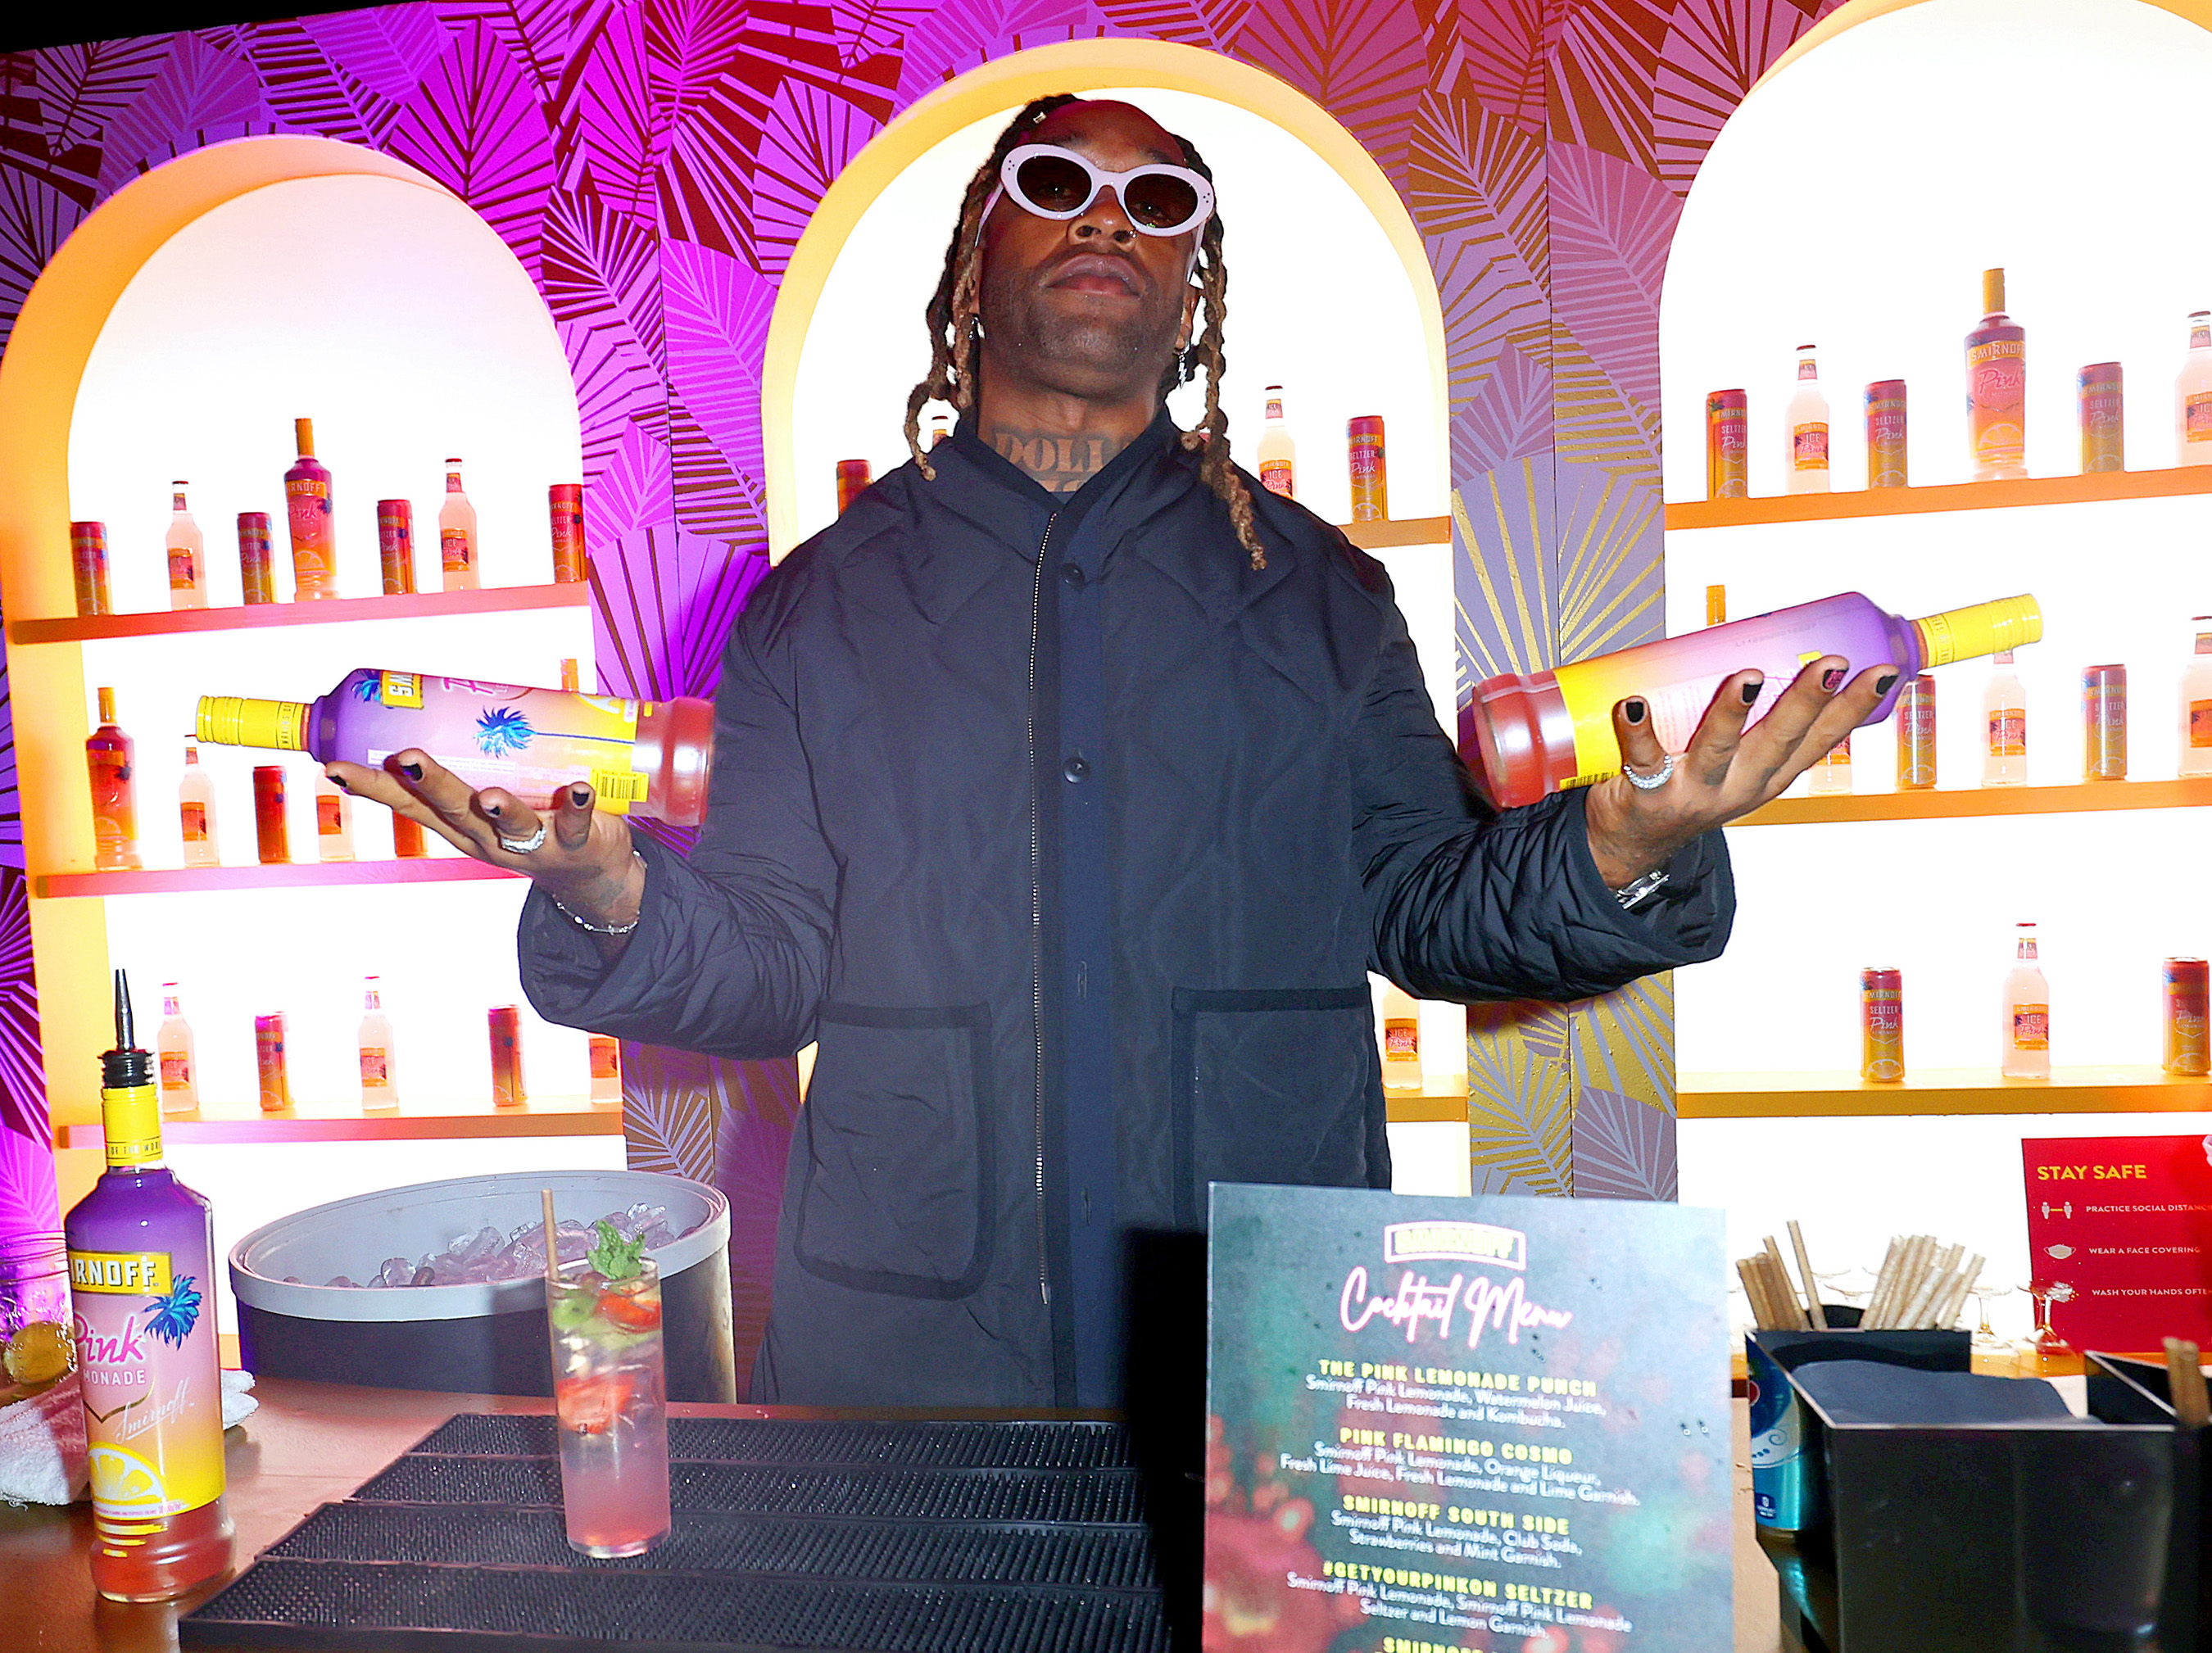 Smirnoff Paints Miami Pink with the Help of Music Superstar Ty Dolla $ign, a Larger-Than-Life Pink Flamingo and Pop-Up Neon Lemonade Stand Serving Its Newest Pink Lemonade Offering